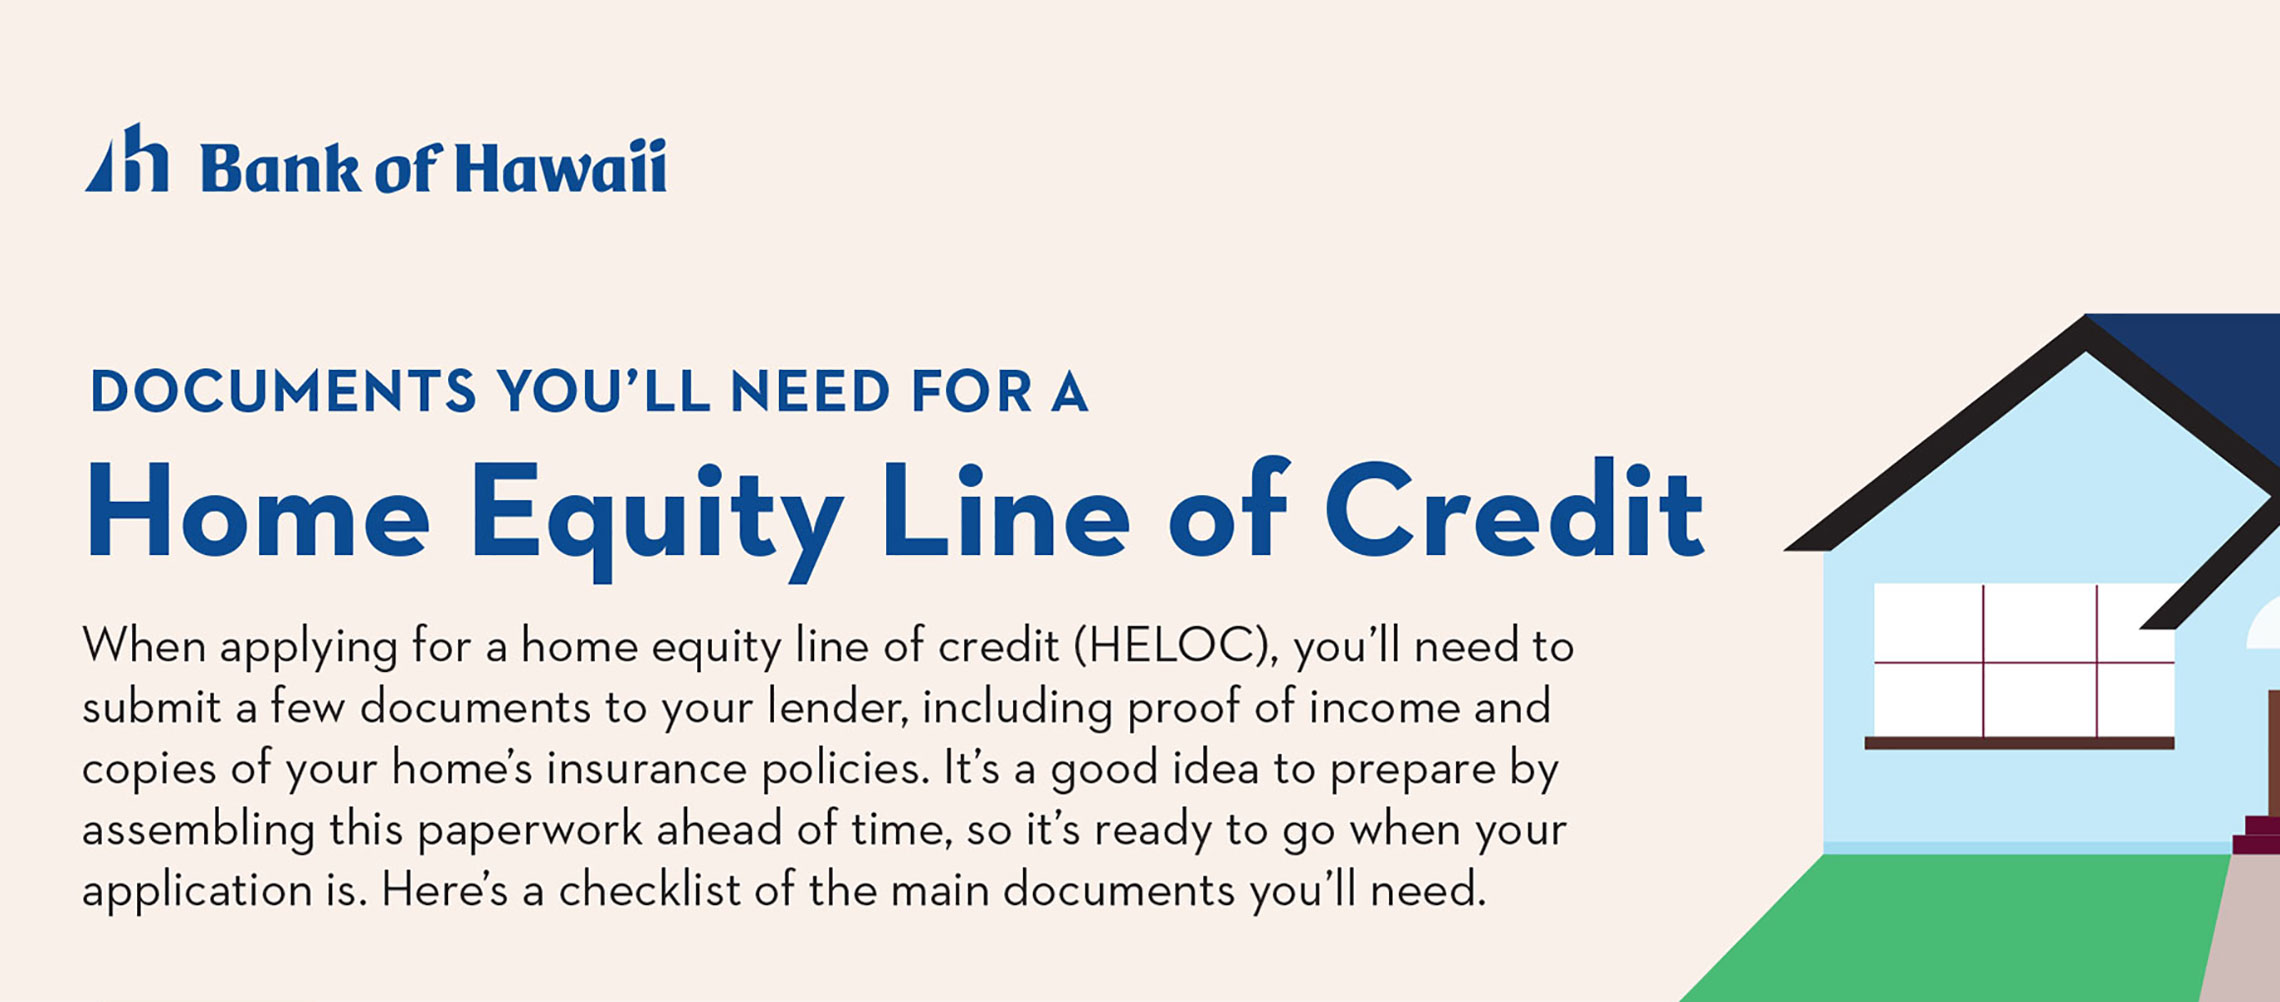 Documents You'll Need for a Home Equity Line of Credit - Bank of ...